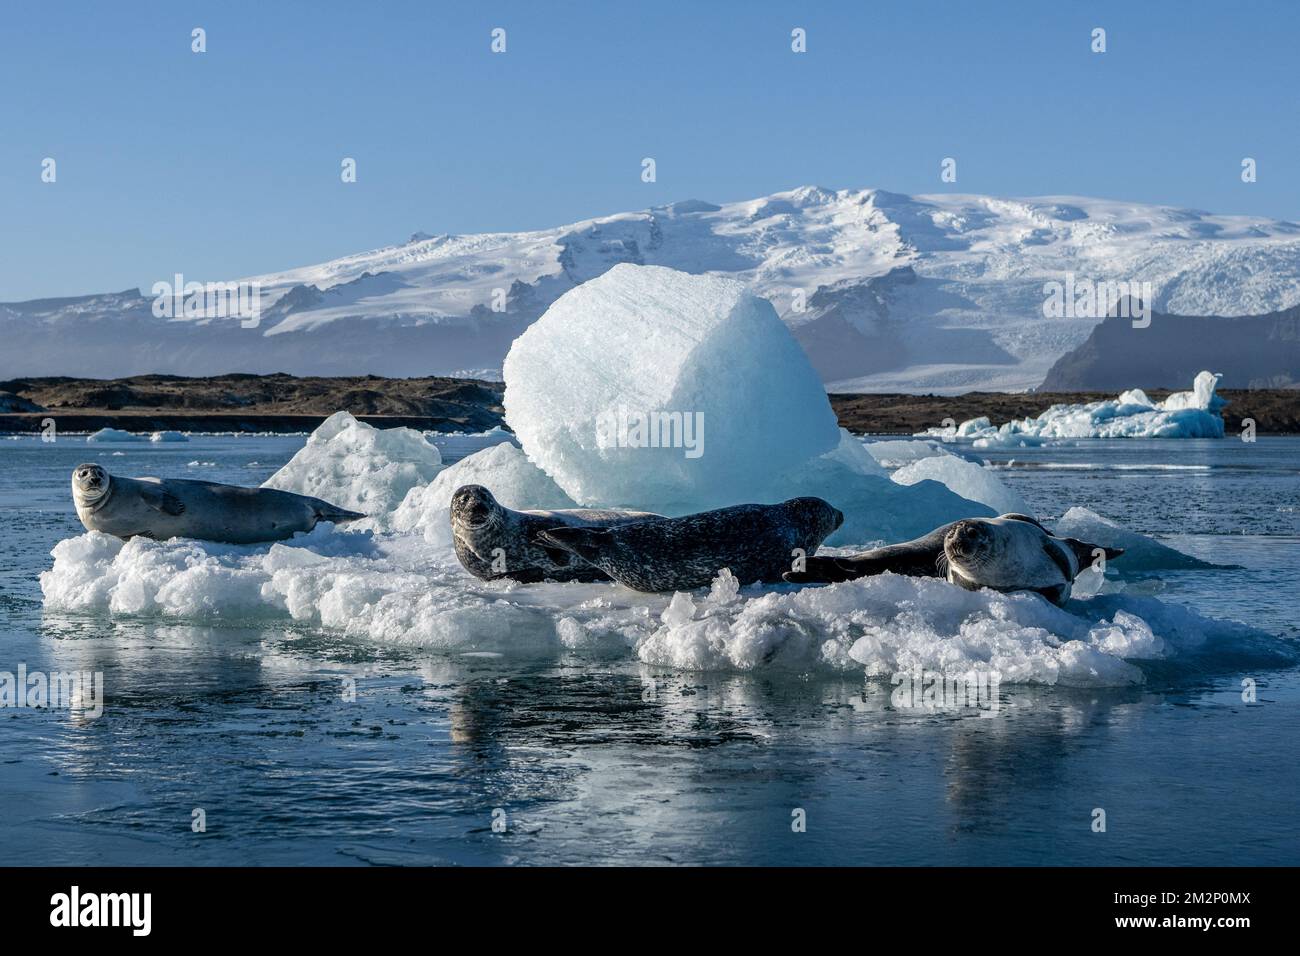 October 19, 2022, JÃ¶kulsÃrlÃ³n, JÃ¶kulsÃrlÃ³n, Iceland: Monk seal are seen resting on the ice blocks floating in JÃ¶kulsÃrlÃ³n. JÃ¶kulsÃrlÃ³n is a lake located in southern Iceland, with an area of 20 km2 and a depth of over 200 meters. Until less than 100 years ago, the BreiÃ°amerkurjÃ¶kull glacier (part of the VatnajÃ¶kull glacier) extended even beyond the ring road. Due to rising temperatures, the glacier has retreated, creating this impressive glacial lagoon. (Credit Image: © Jorge Castellanos/SOPA Images via ZUMA Press Wire) Stock Photo